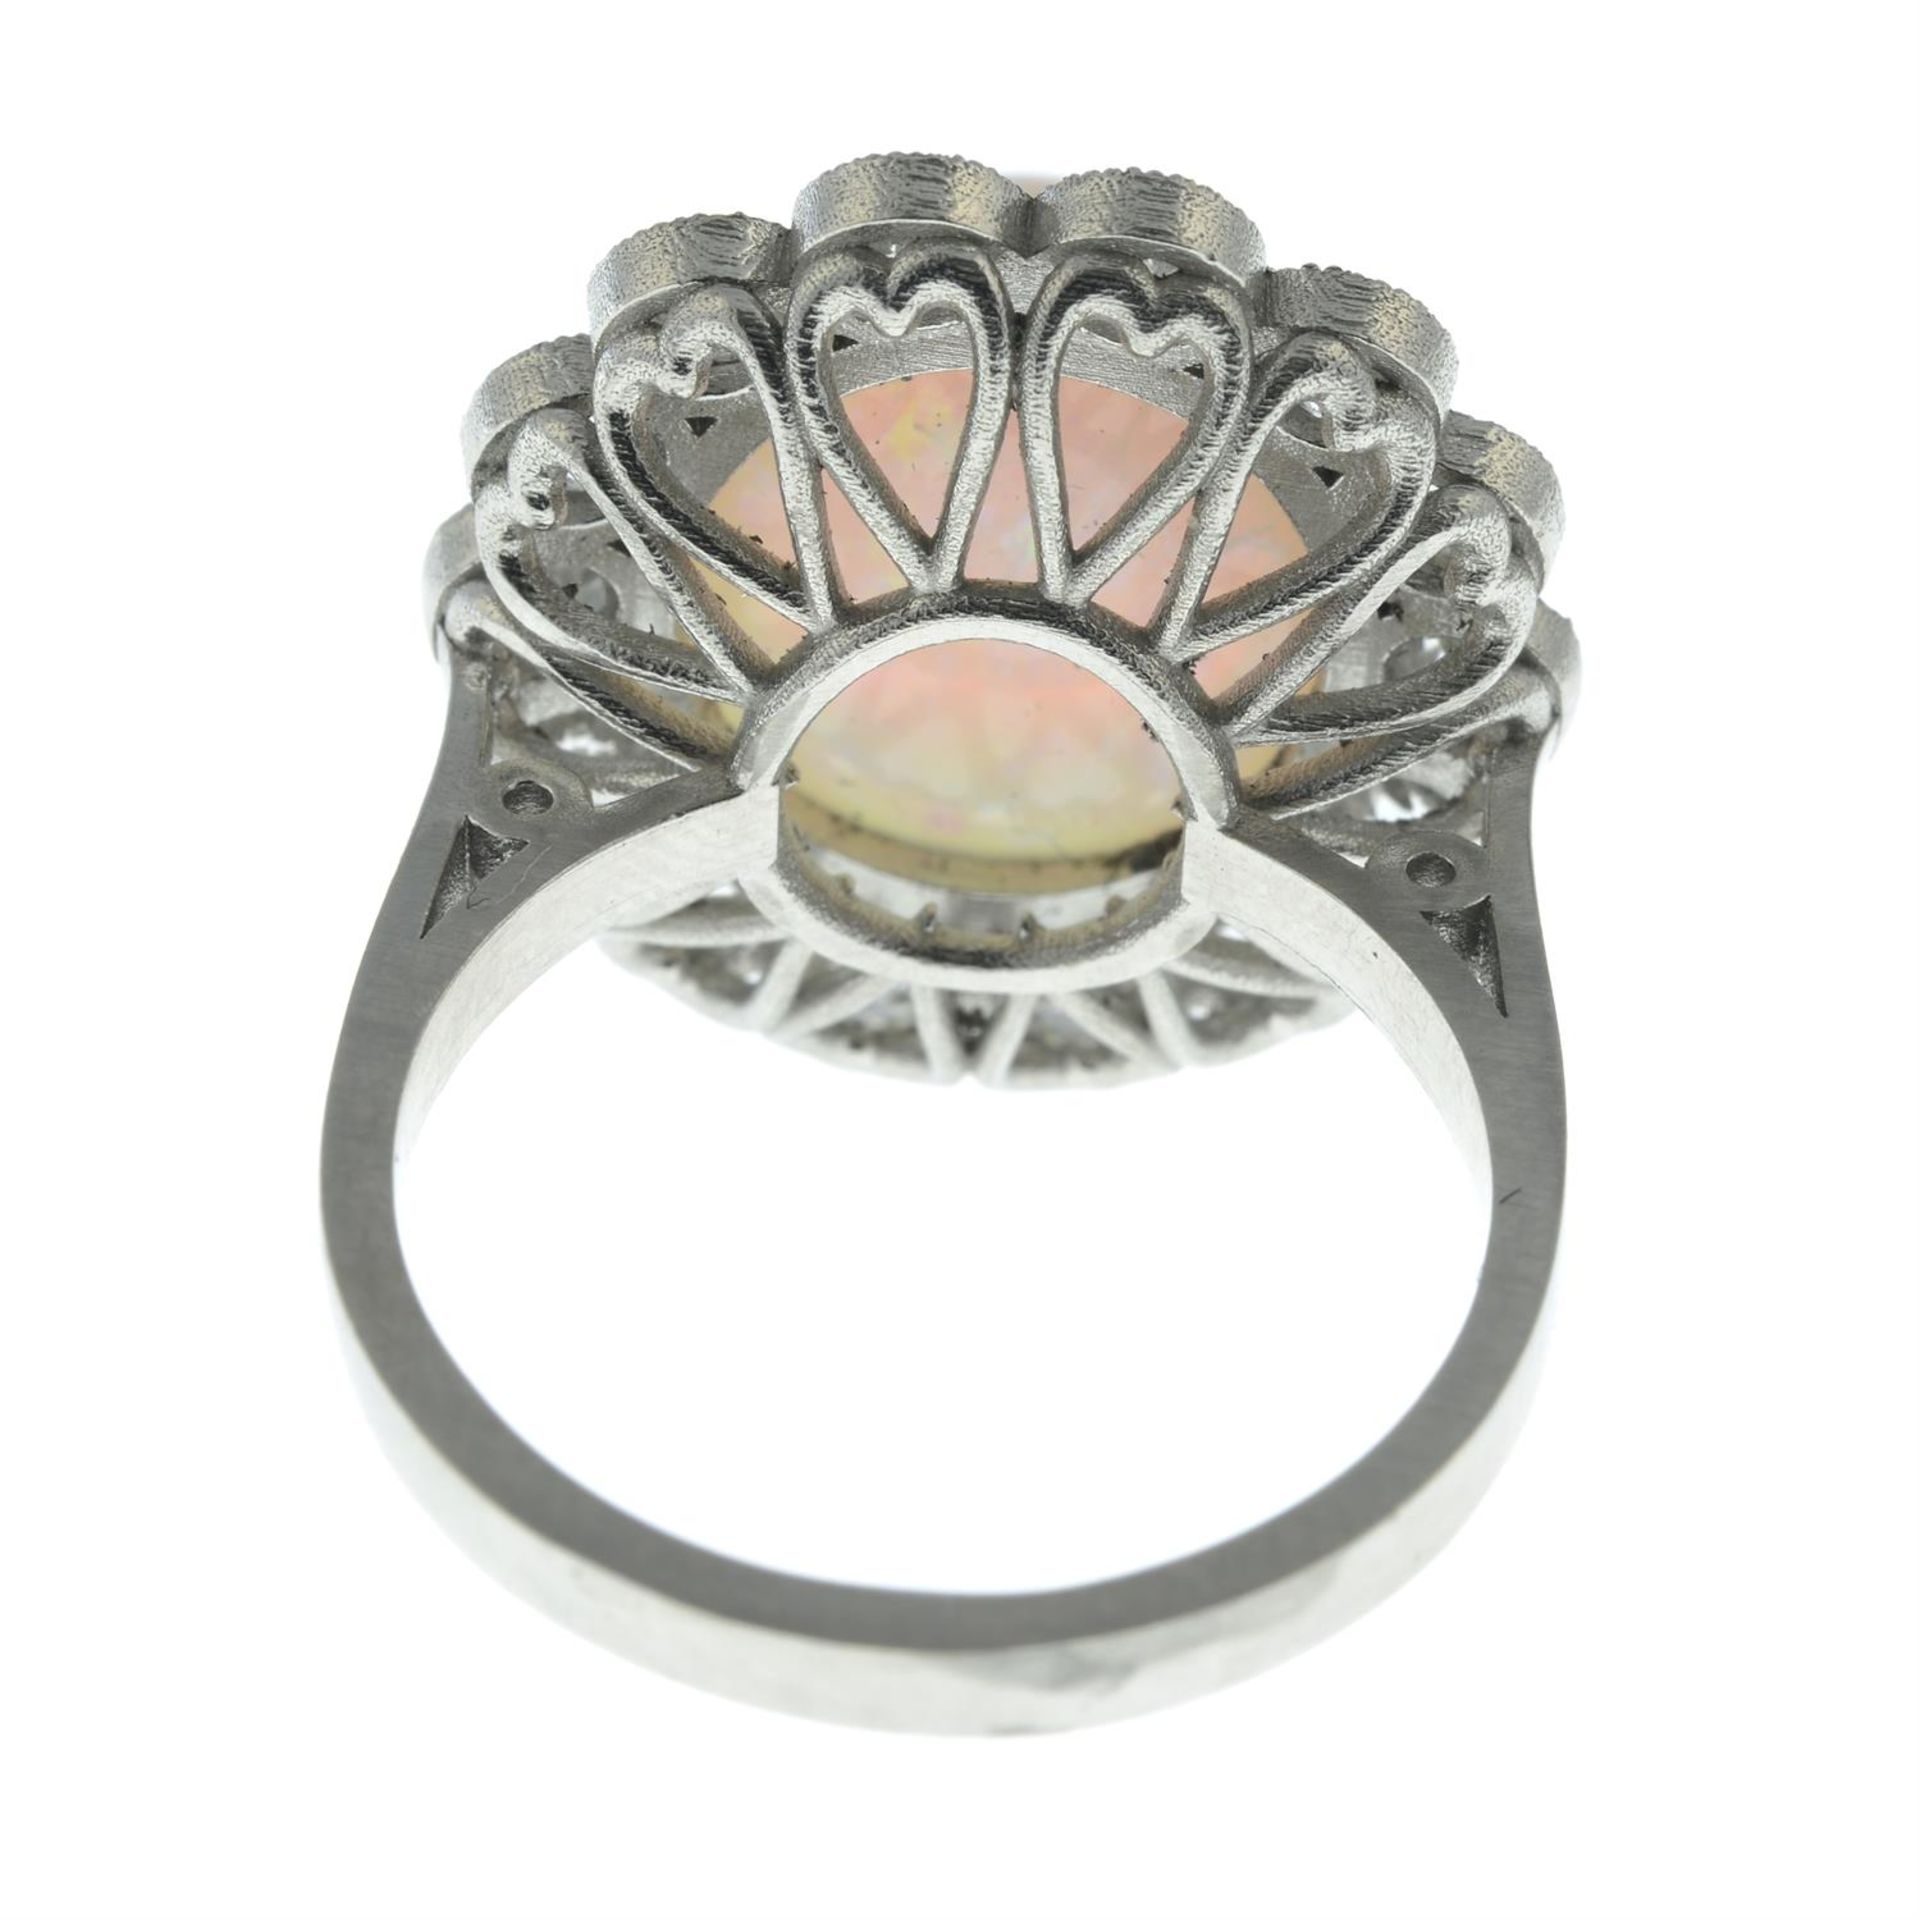 An opal and old-cut diamond cluster ring. - Image 4 of 5